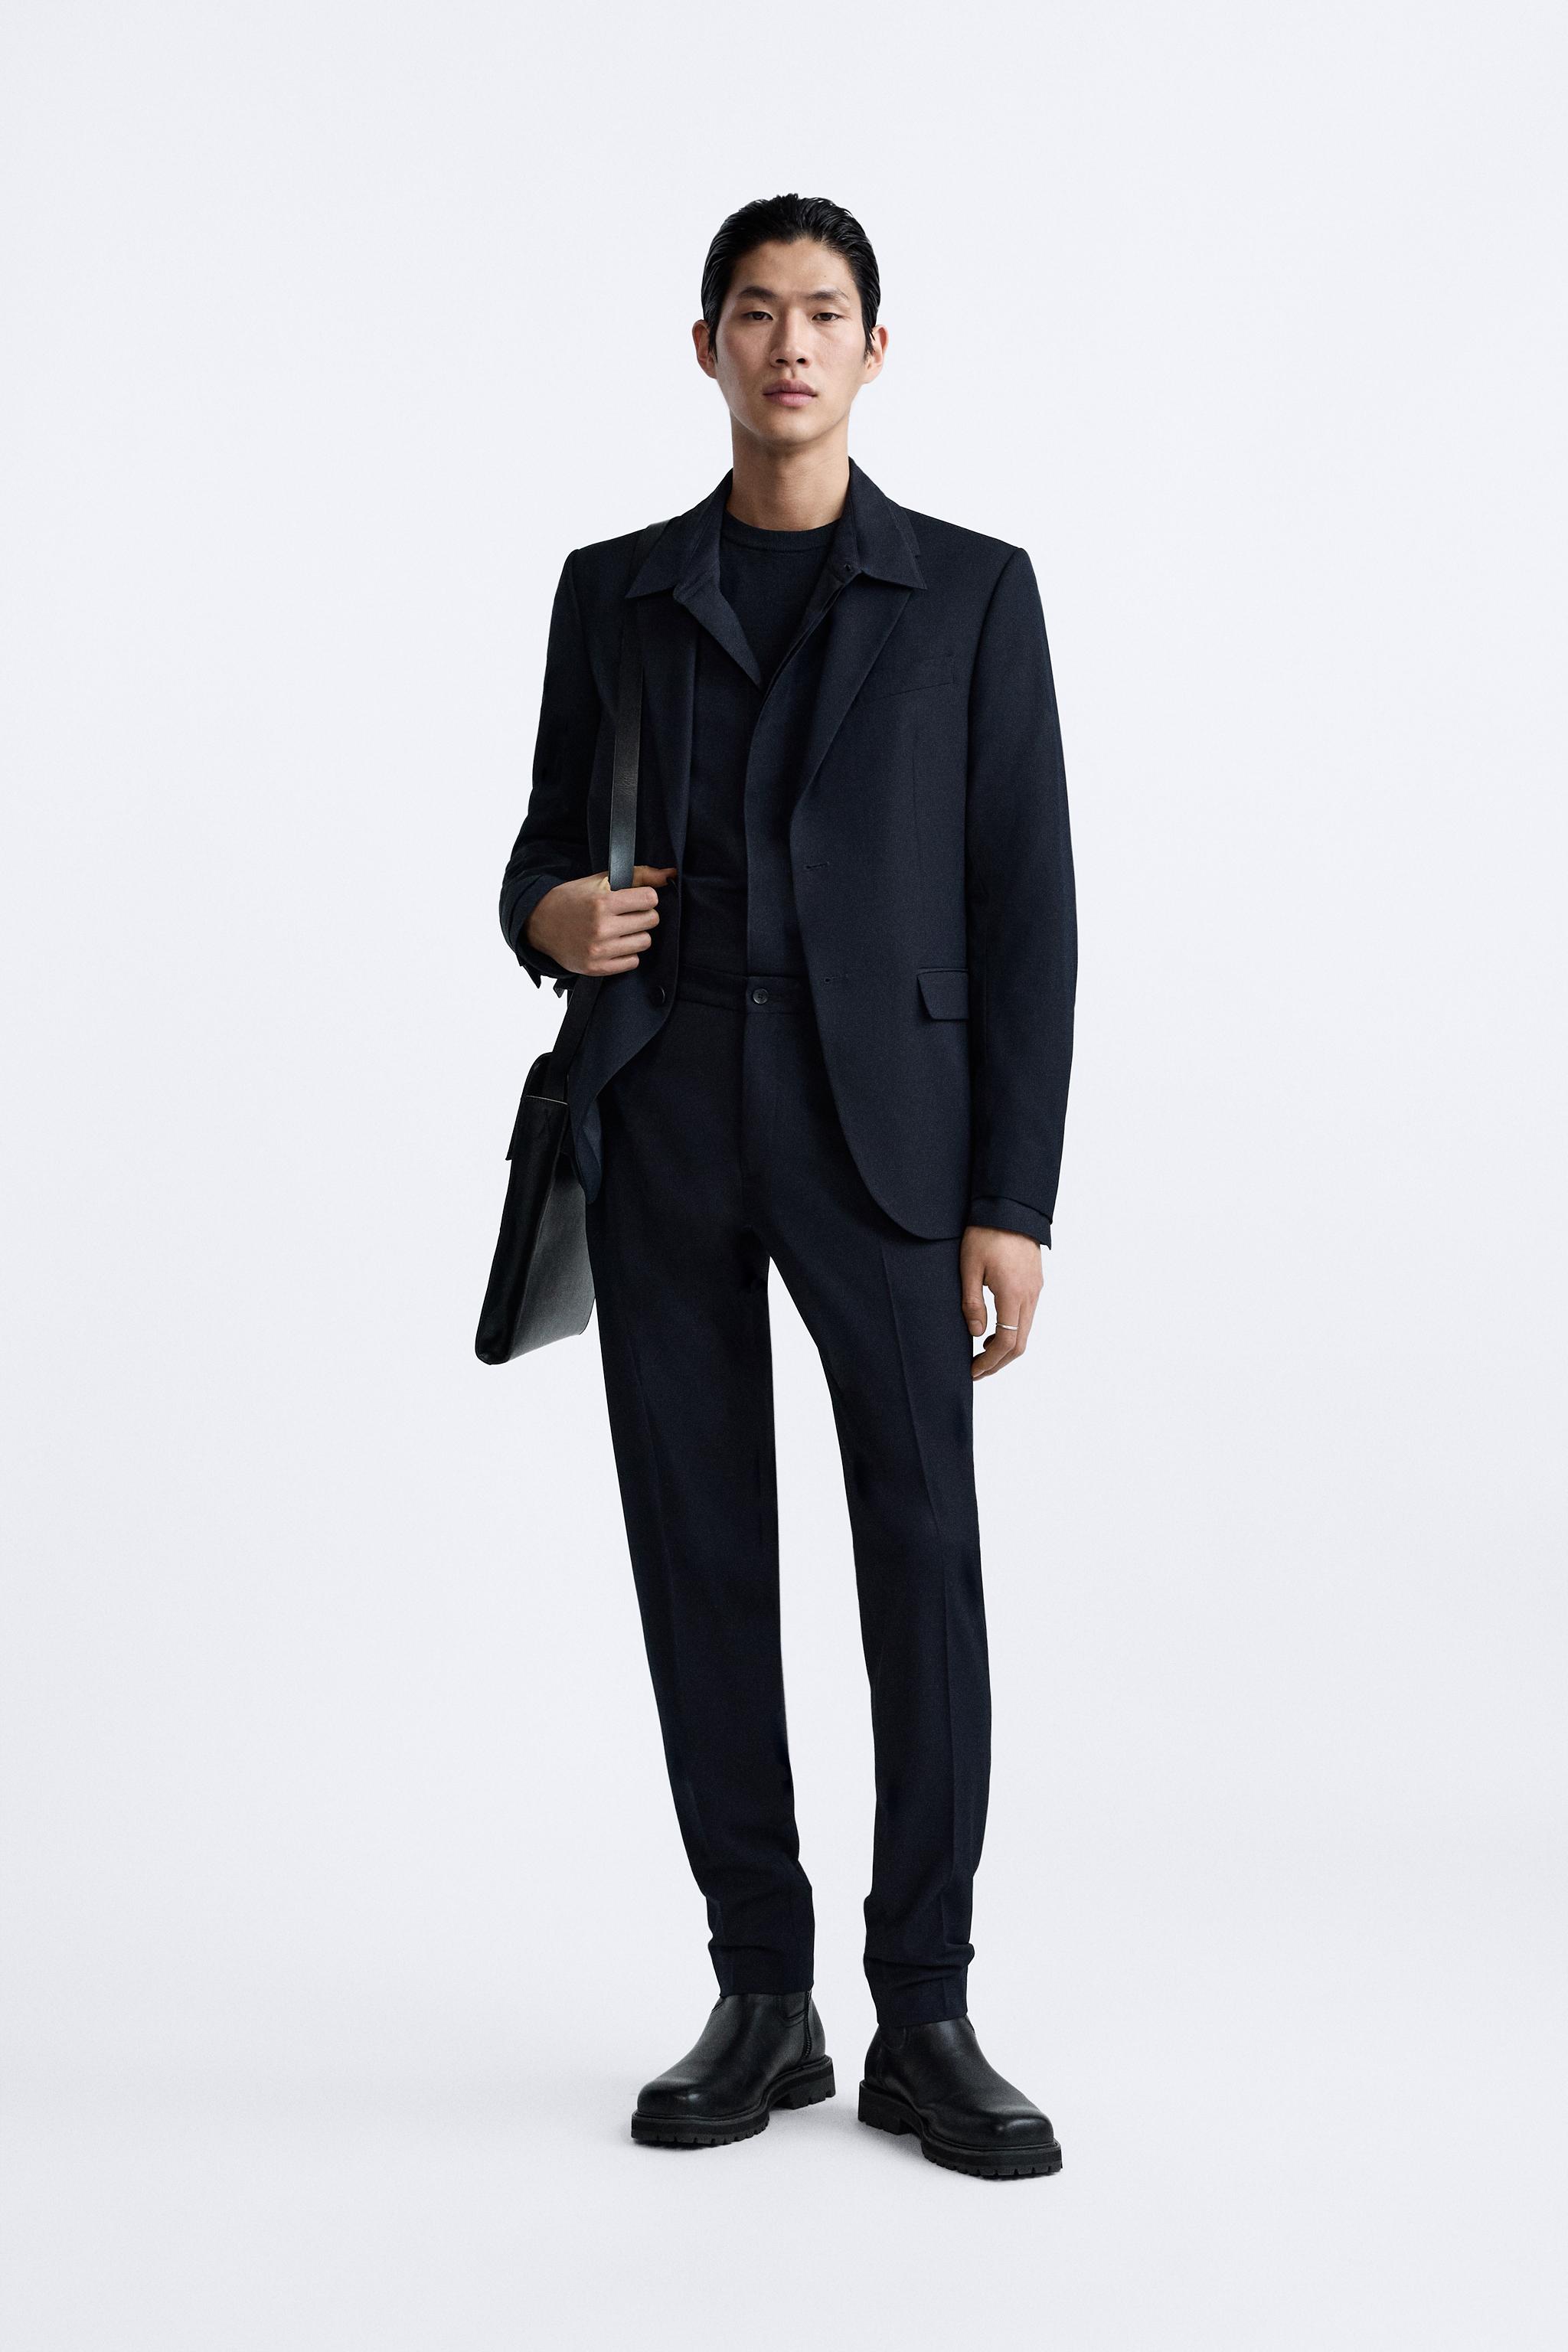 Men's Formal Suits | Explore our New Arrivals | ZARA United States